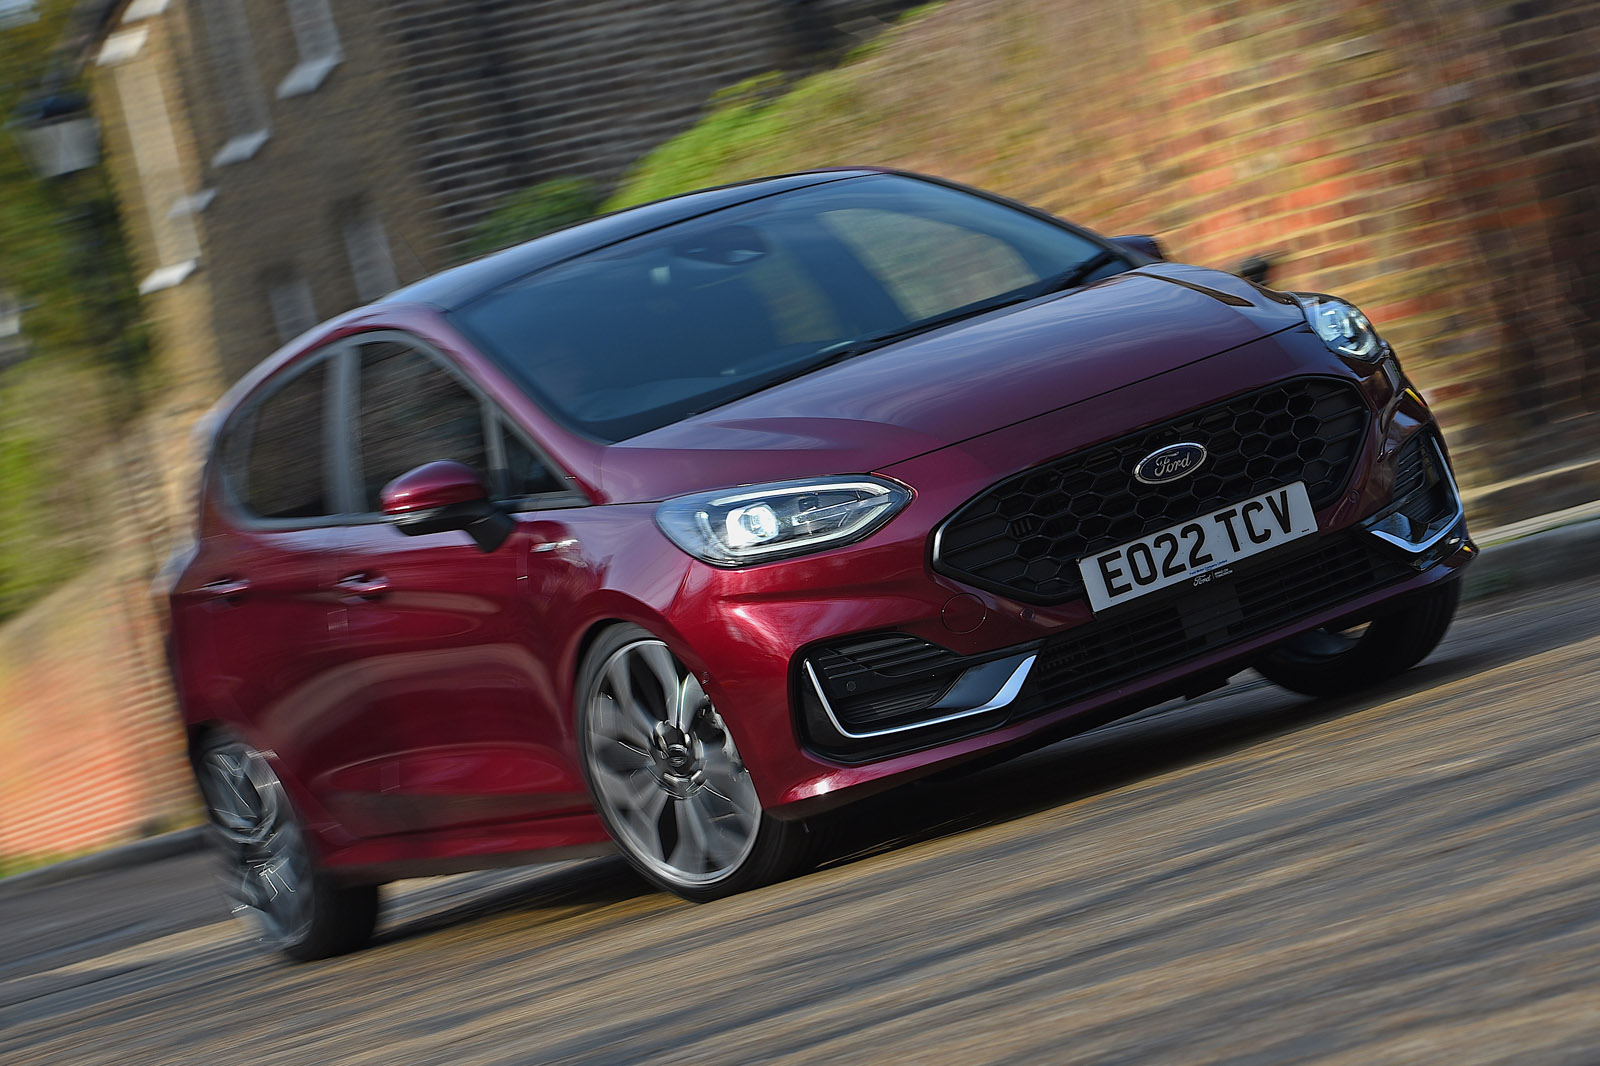 Ford Fiesta 1.0 MHEV ST-Line Vignale 2022 UK first drive |